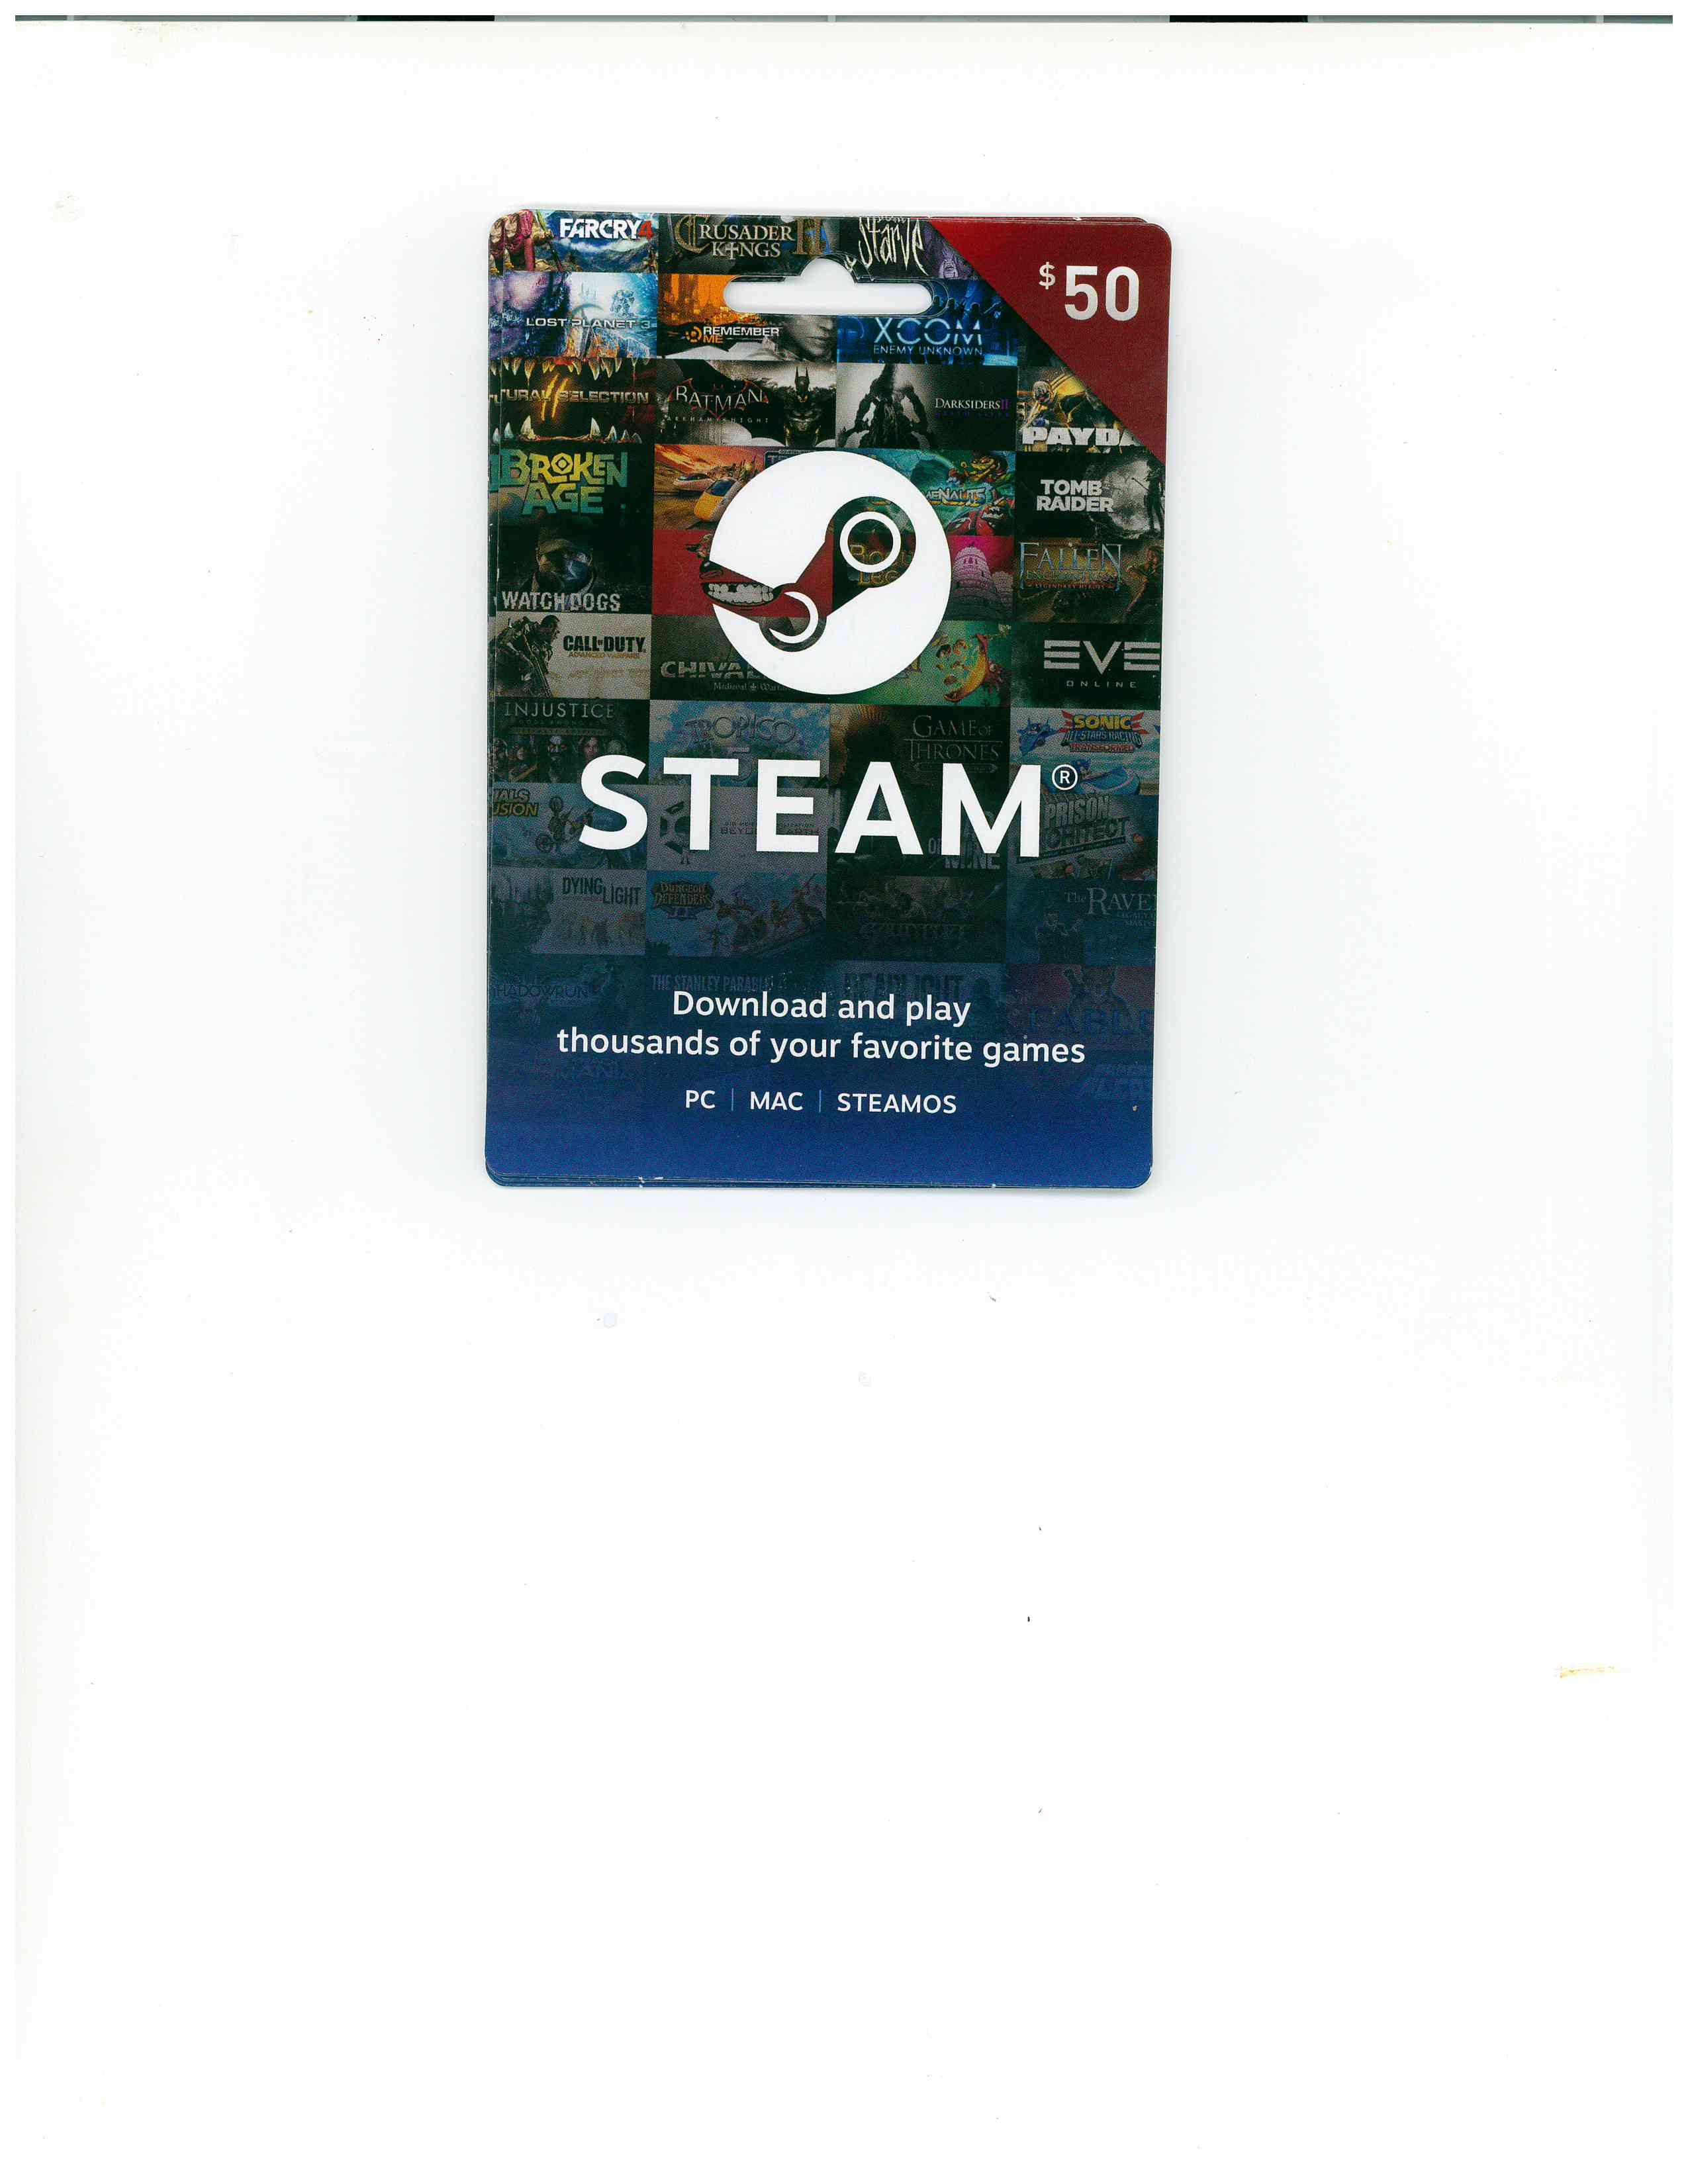 Steam Gift Card on sale at numerous retail stores.